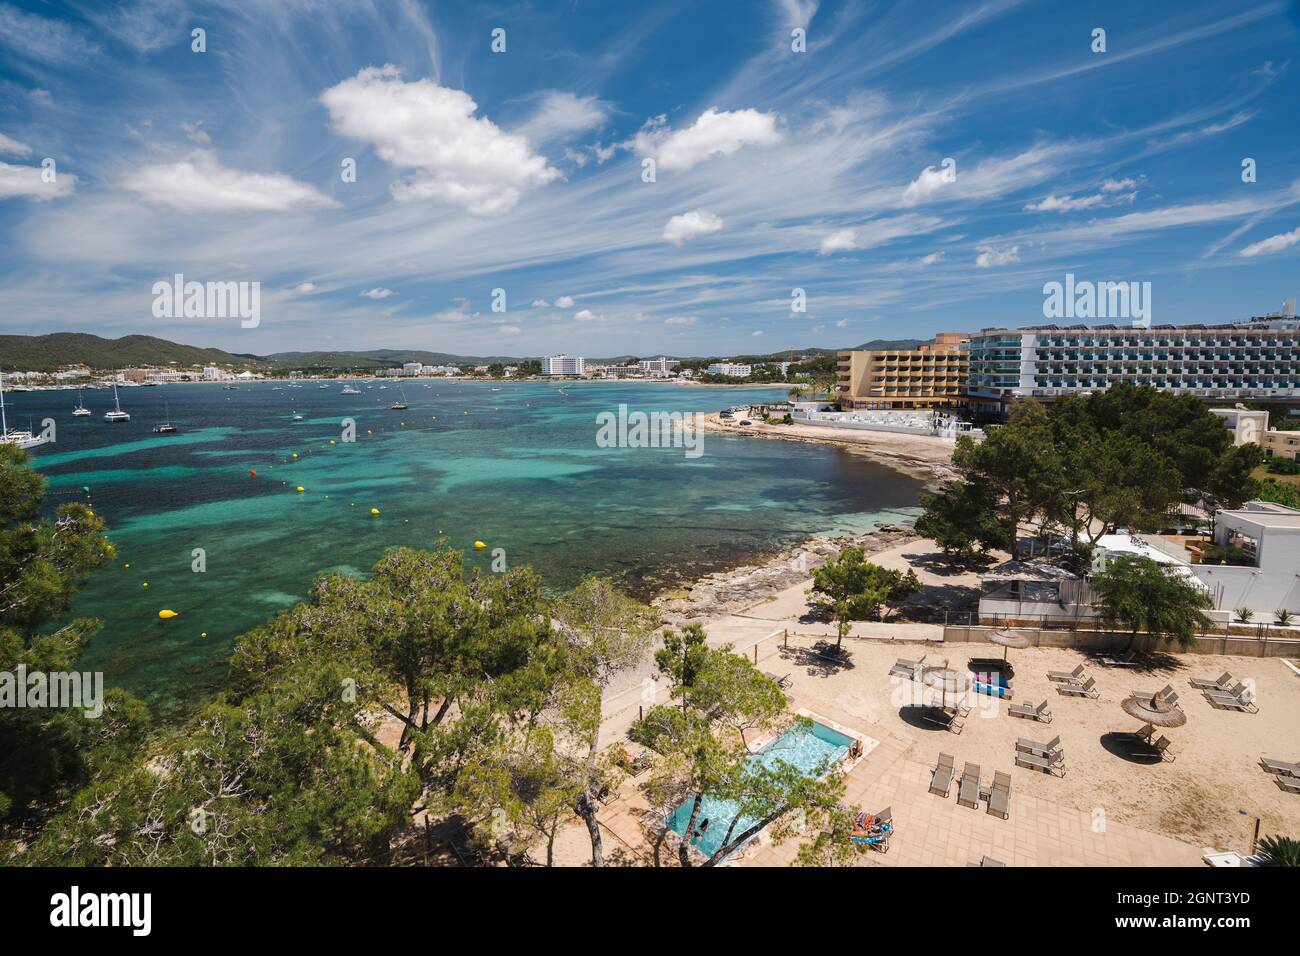 View of the beach and hotels on shore, Ibiza island, Spain Stock Photo